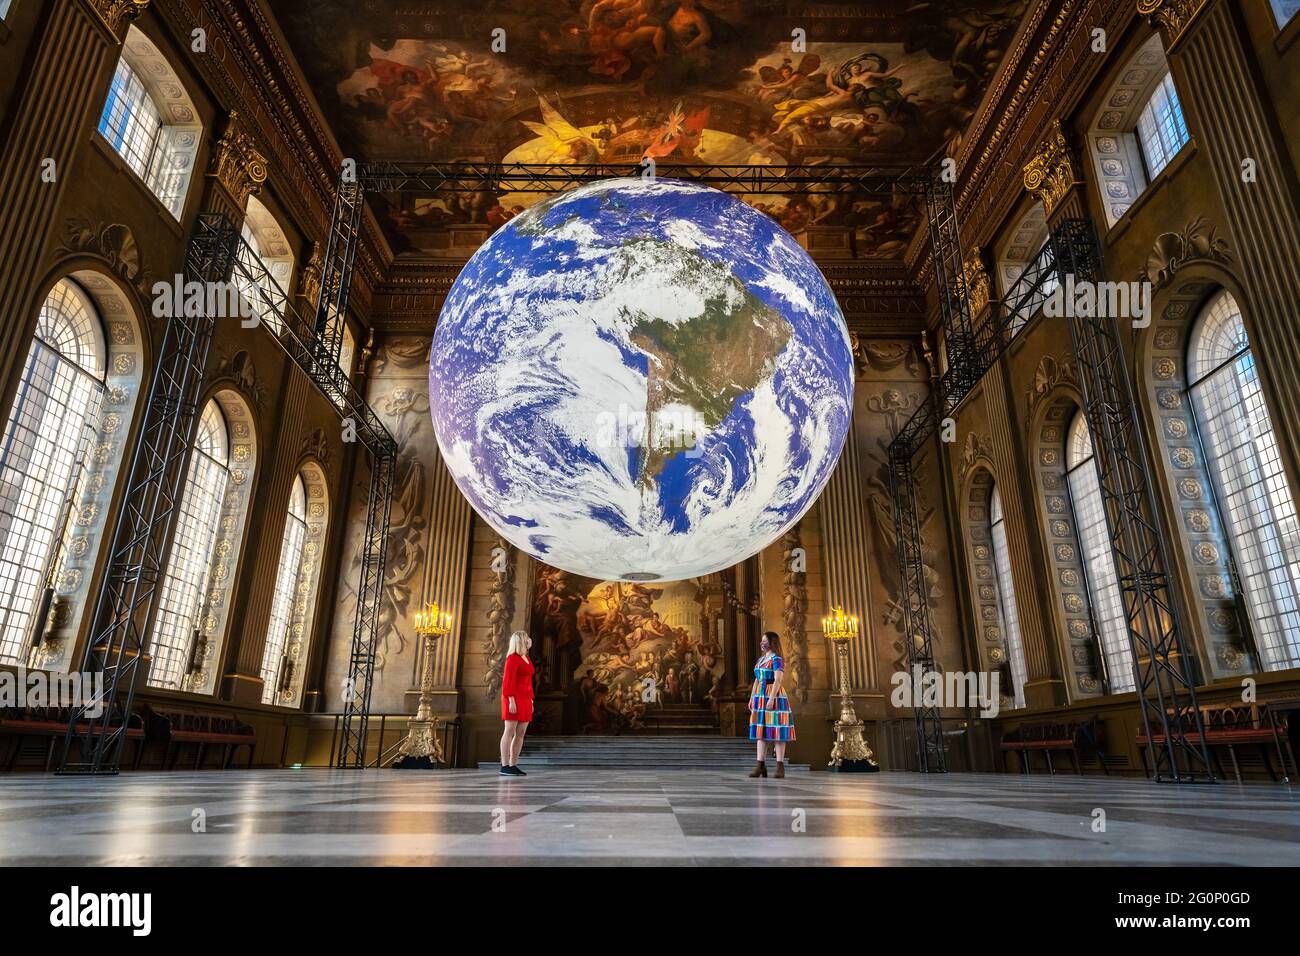 Gaia, a 7m-wide rotating replica earth installation by Luke Jerram on display in the Painted Hall, Old Royal Naval college in Greenwich. Stock Photo